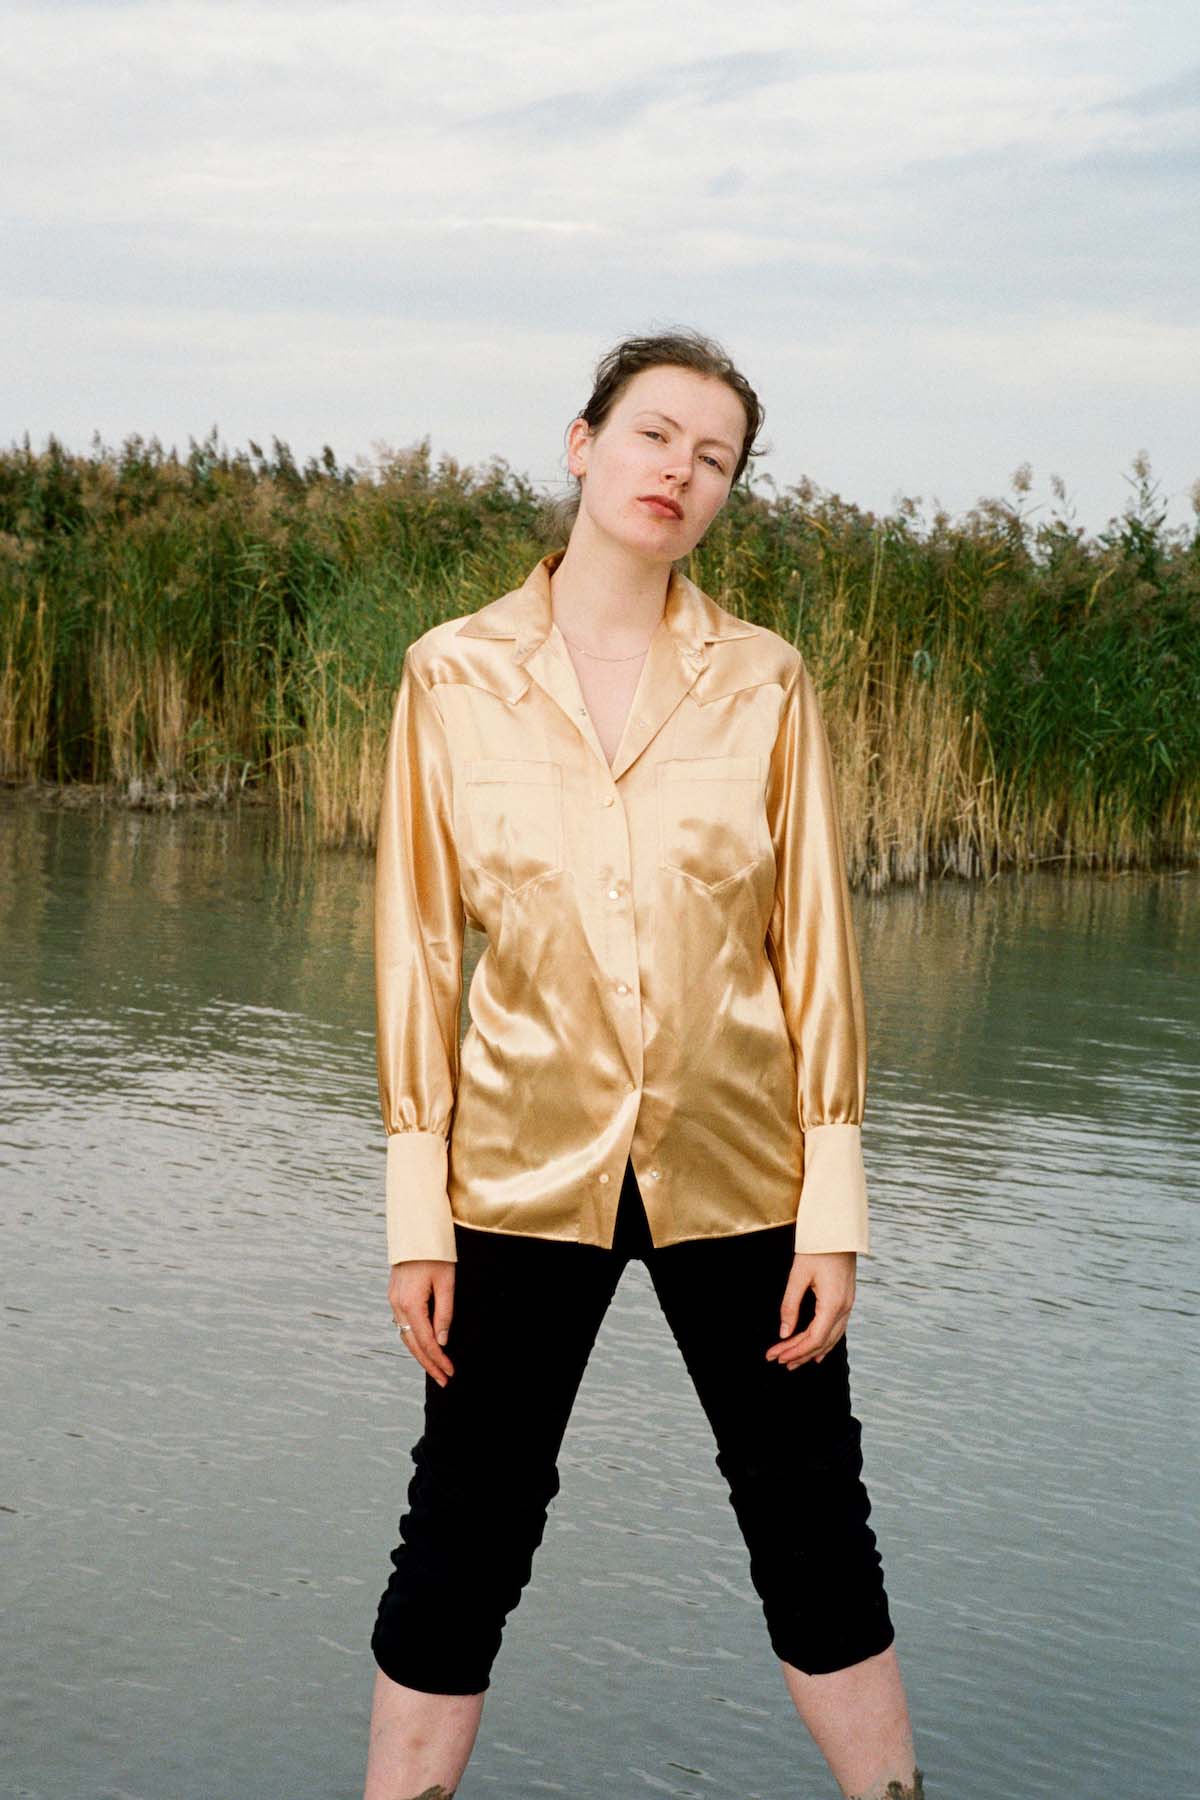 Young, white woman stands with wide legs in or in front of the edge of a lake, her feet are not visible. Water stretches in the background, closed off by green-brown reeds. Rosa Anschütz has tied her brown hair into a plait, wears a loose, golden blouse and black shin-length, tight trousers. She lets her arms hang close to her body and looks confidently into the camera.